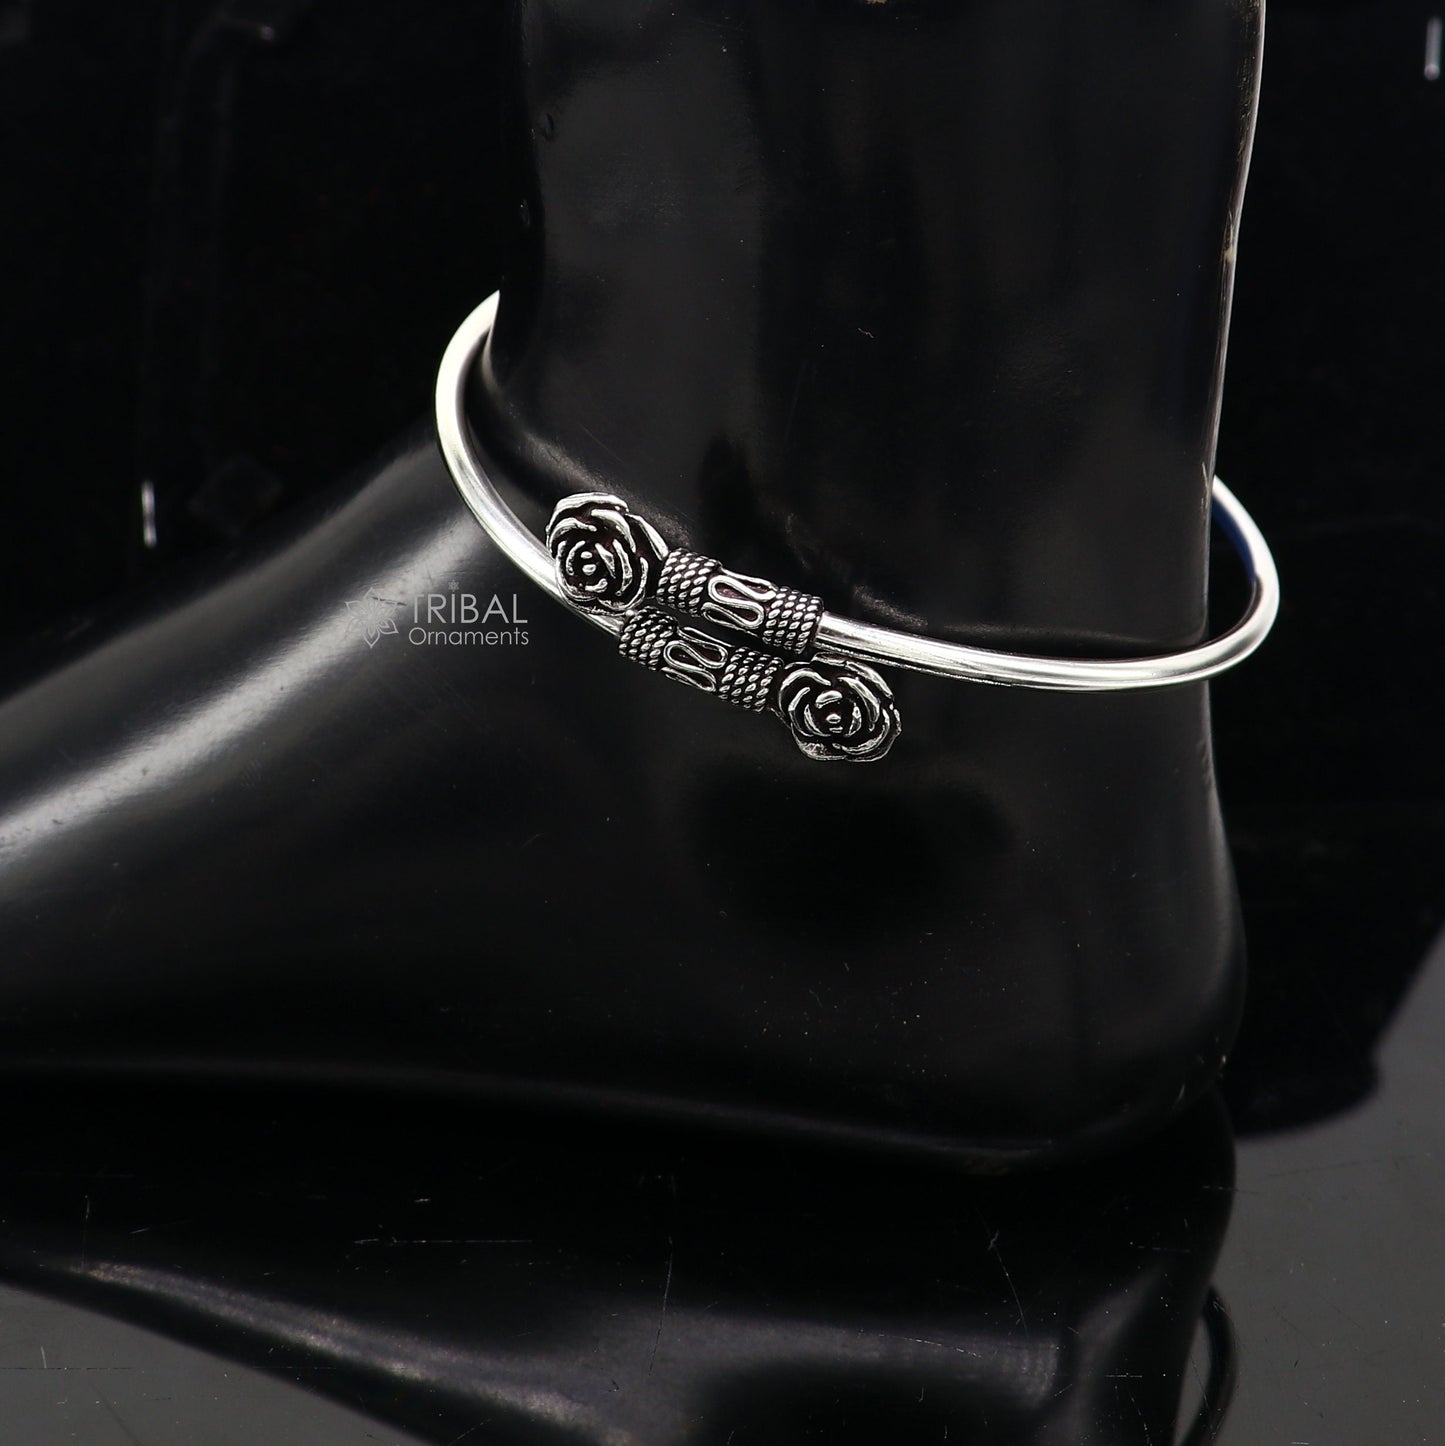 Trendy cultural 925 sterling silver handmade fabulous foot anklet kada/anklet amazing rose flower design tribal ethnic jewelry india nsfk103 - TRIBAL ORNAMENTS